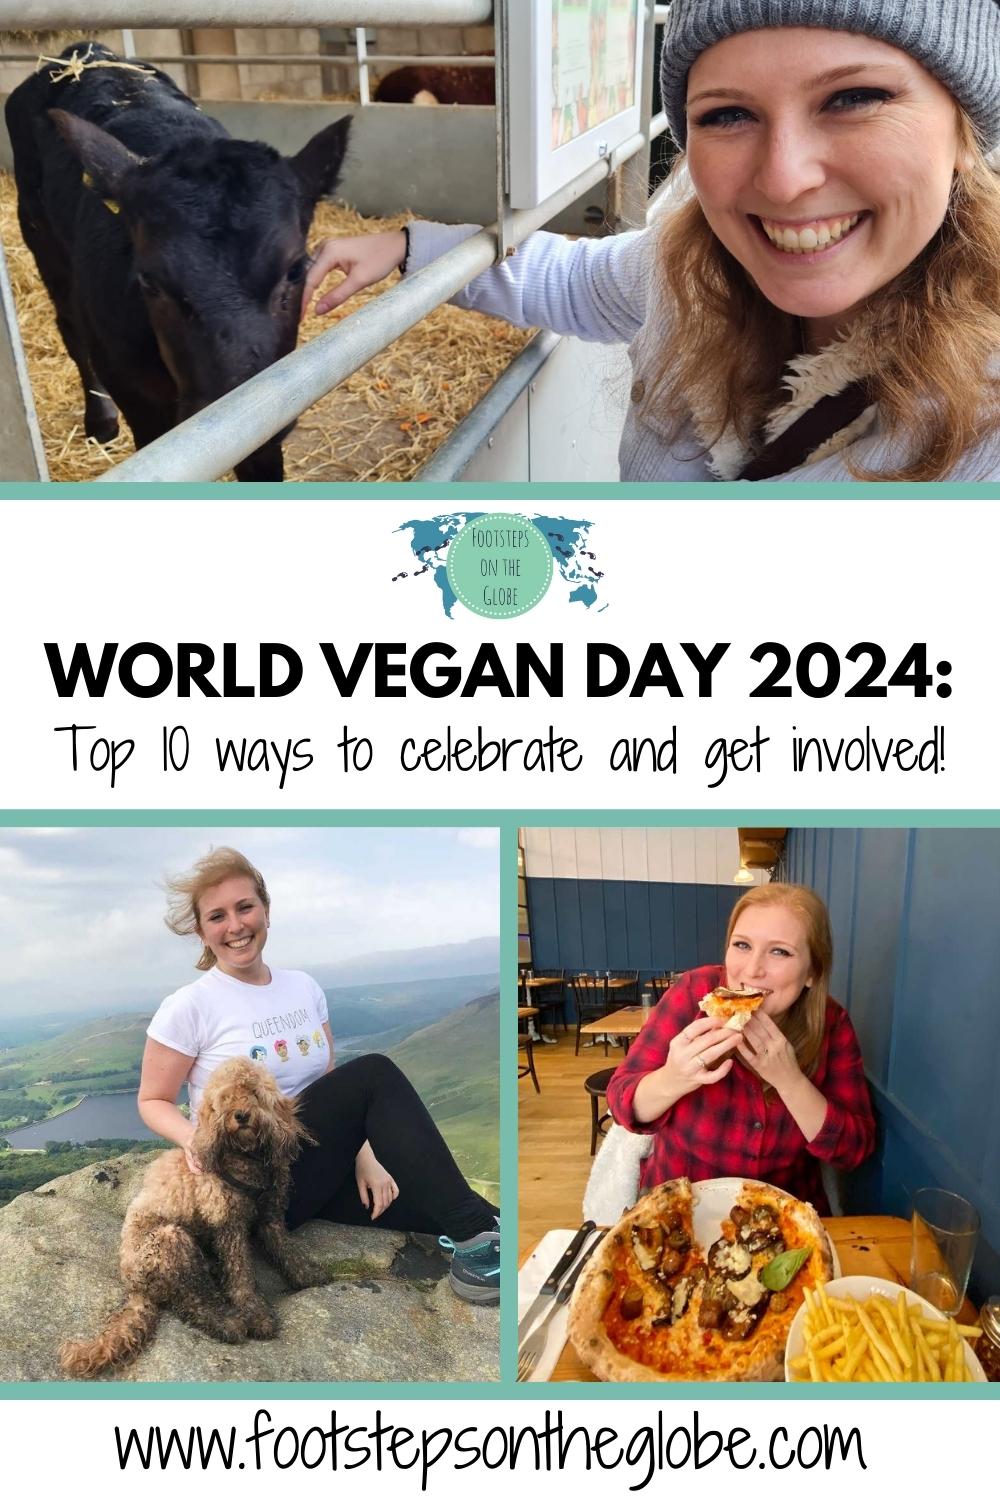 Pinterest image with three different photos of Mel hiking with her dog, eating pizza and stroking a cow with the text: "WORLD VEGAN DAY 2023: Top 10 ways to celebrate and get involved!"